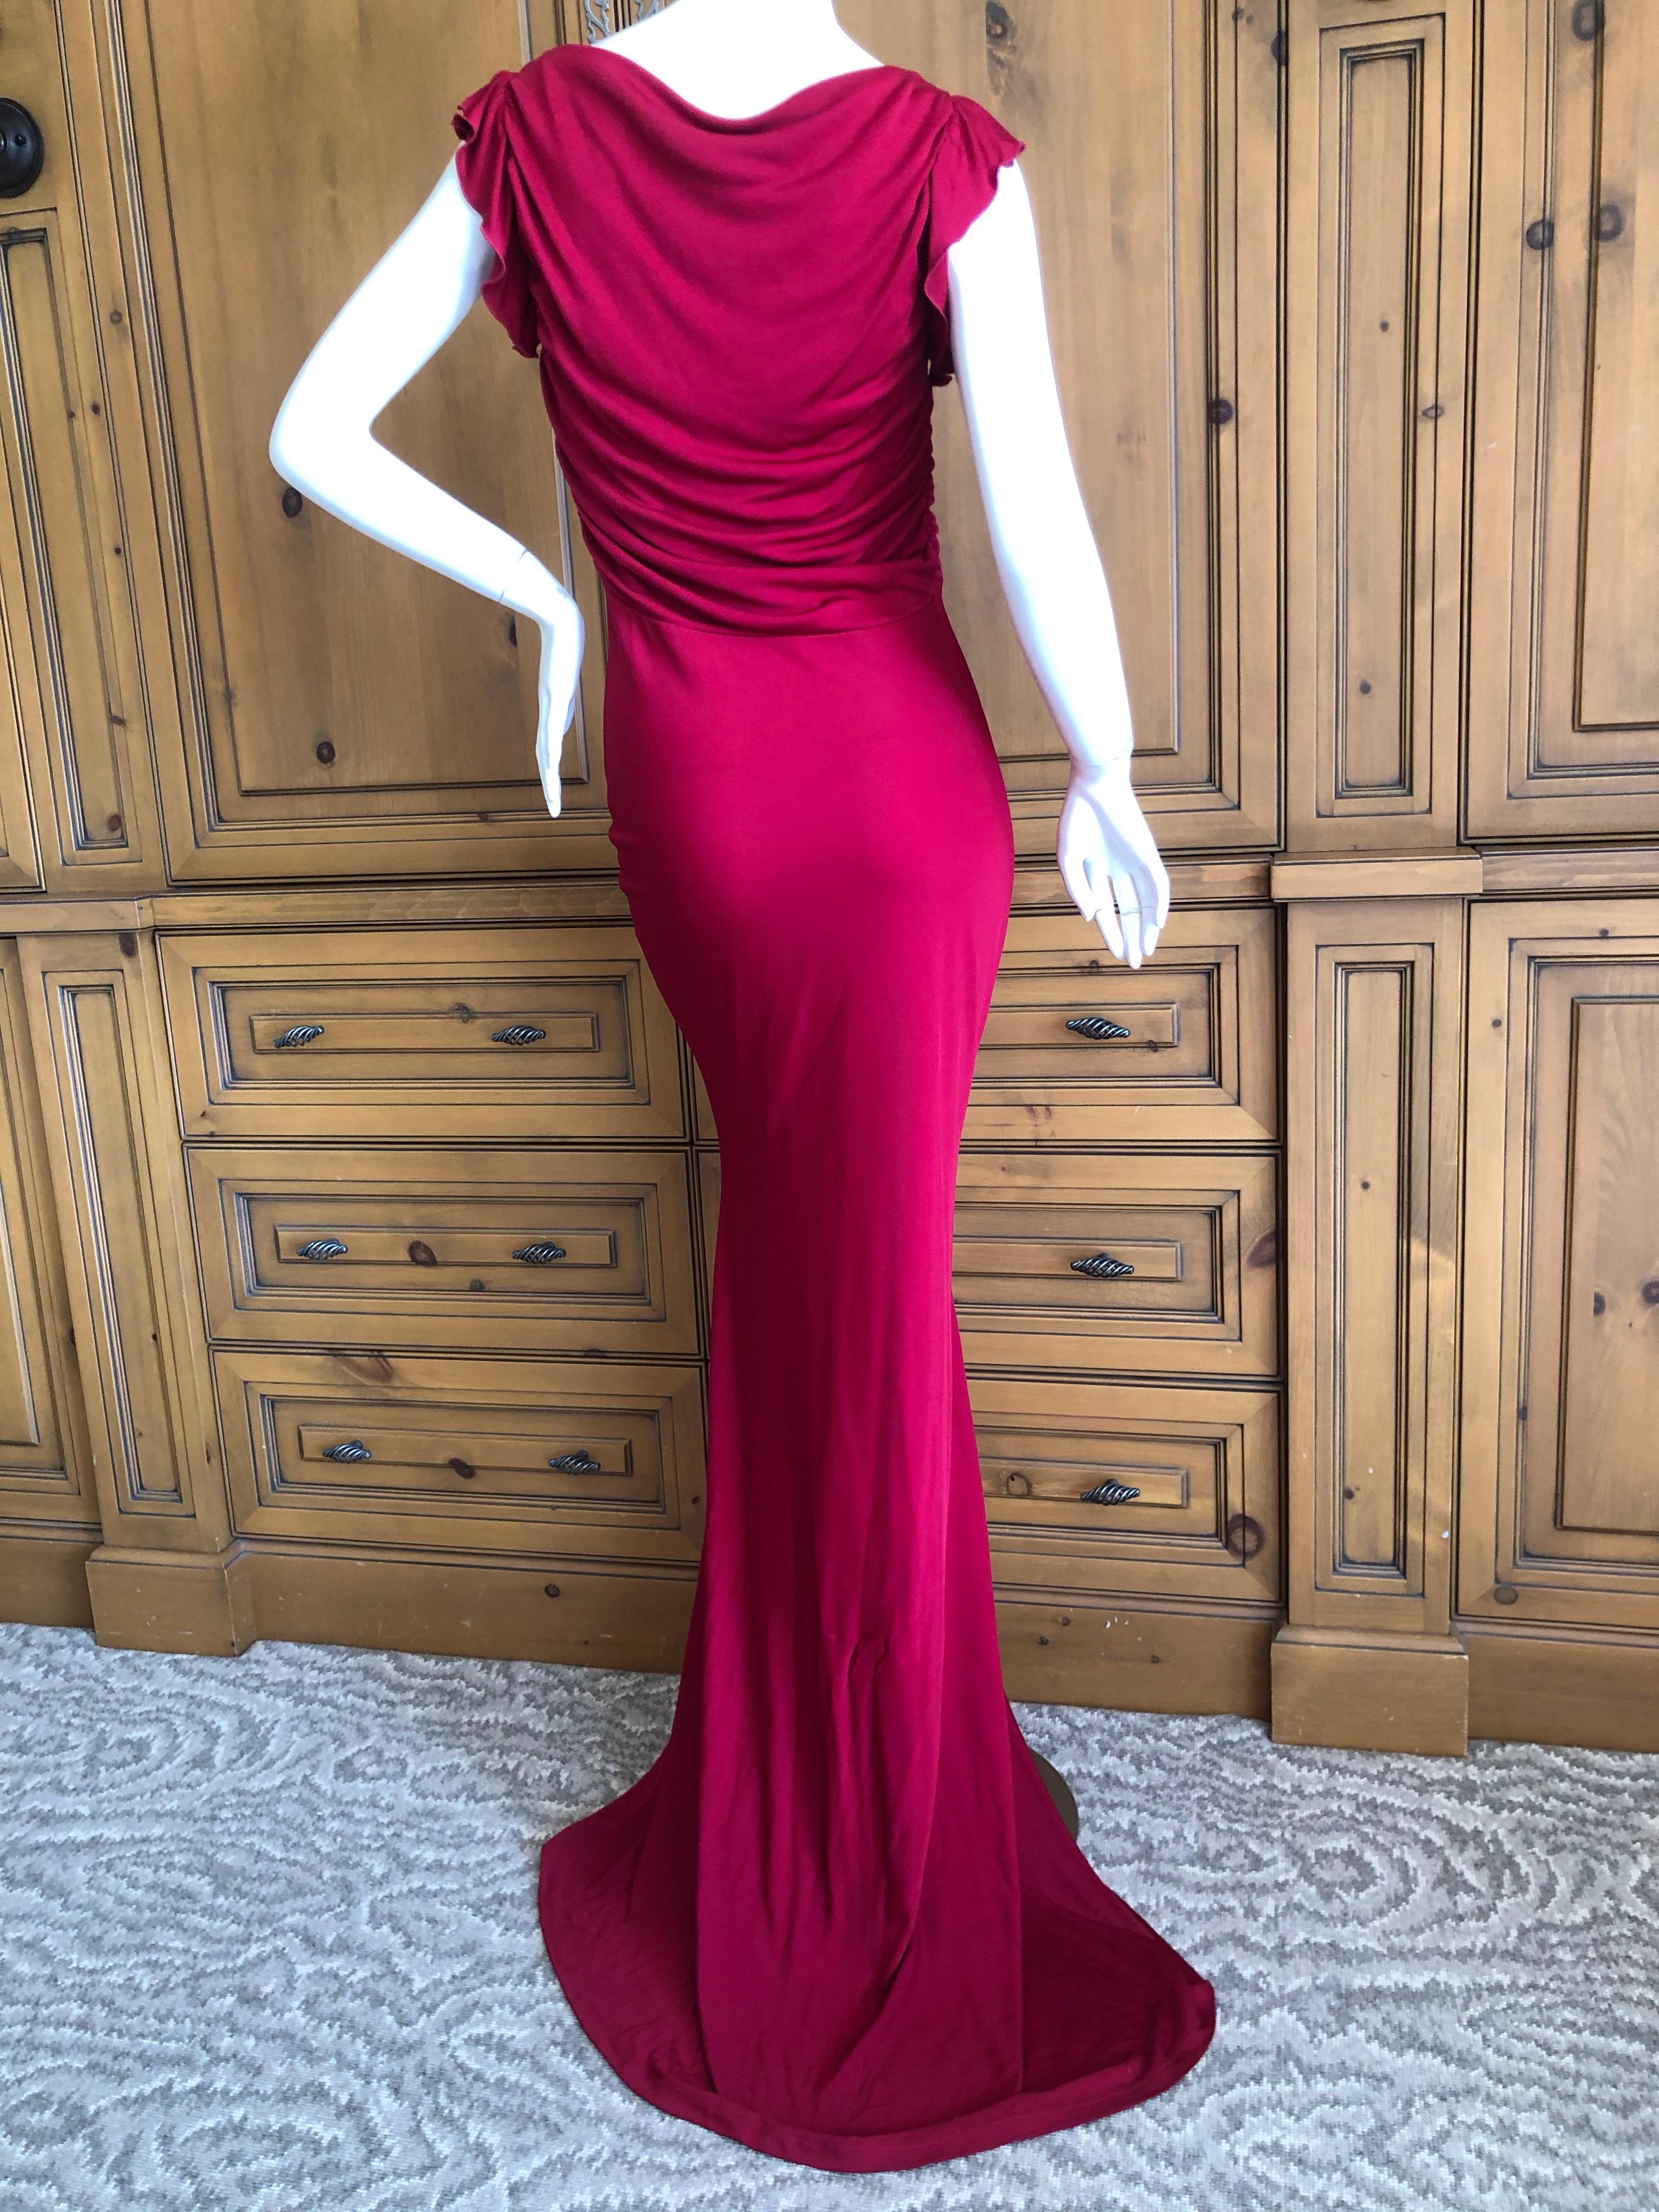   John Galliano Vintage Bias Cut Red Evening Dress with Keyhole Details For Sale 3